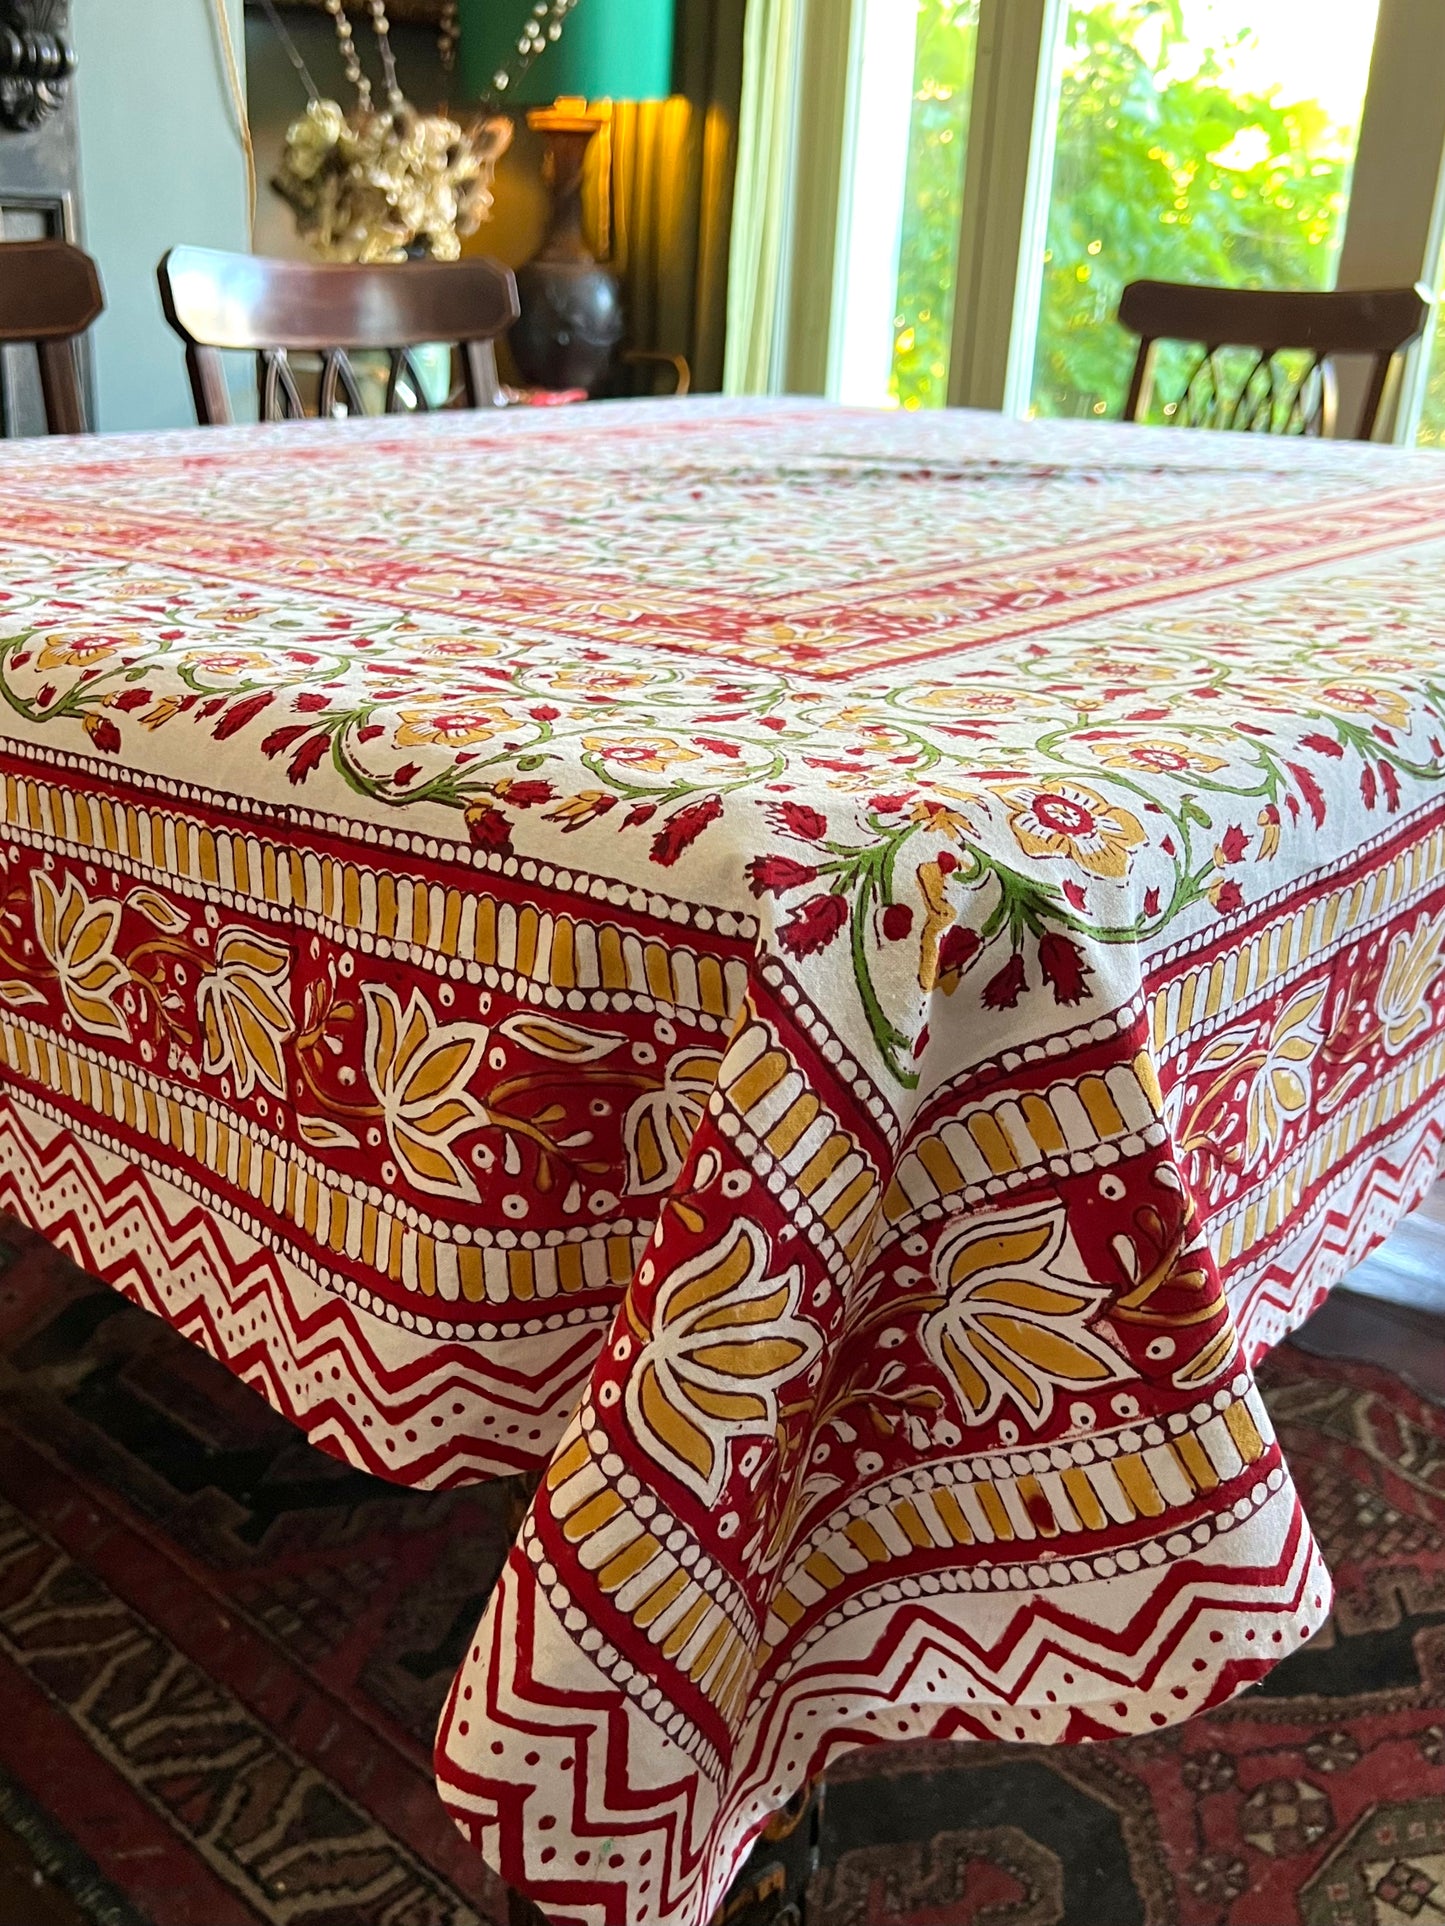 Hand Block Printed Indian Cotton Tablecloth - Winter Tudor (Reds & Greens)